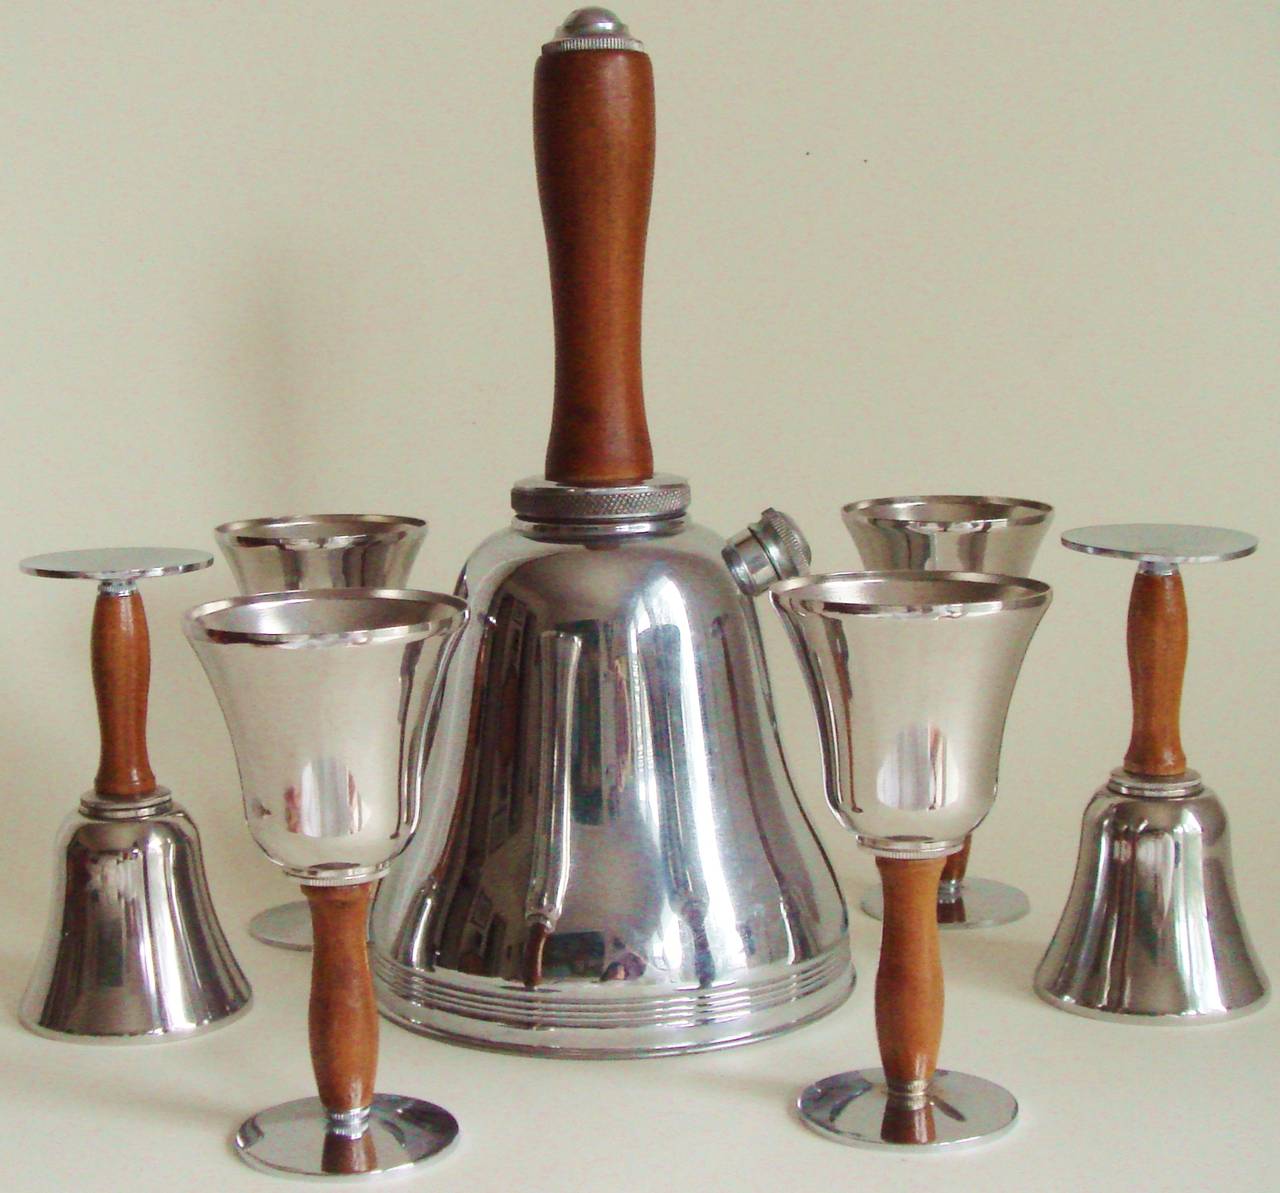 This late 1930s iconic American Art Deco chrome and wood town crier seven-piece cocktail set was made by the Keystone Silver Company of Pennsylvania. It is stamped with the word 